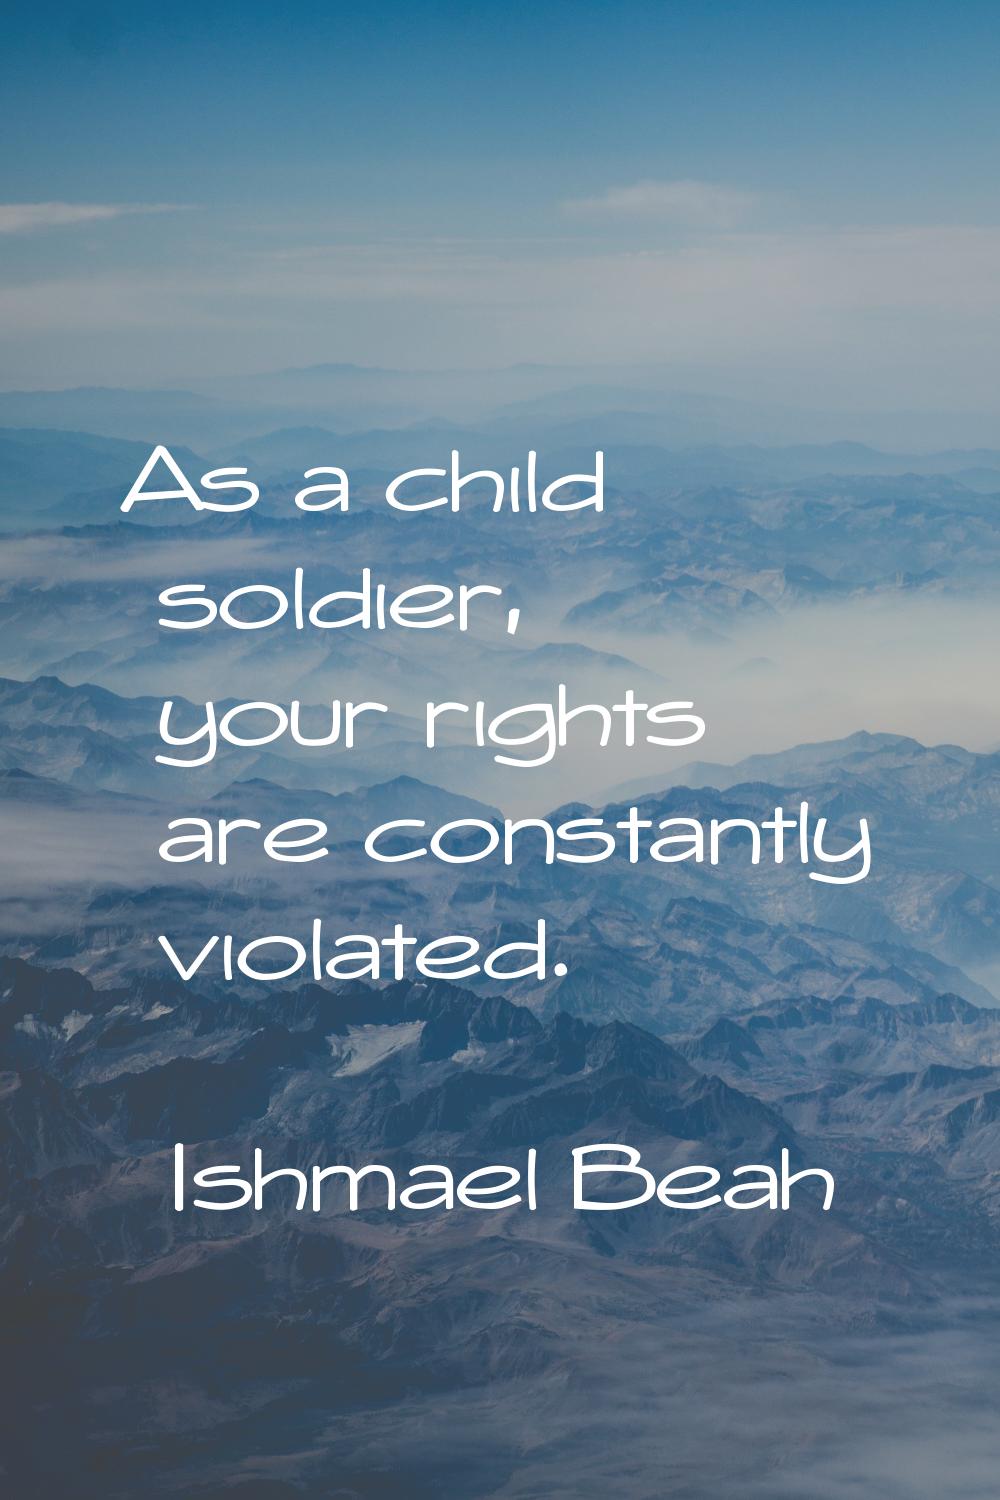 As a child soldier, your rights are constantly violated.